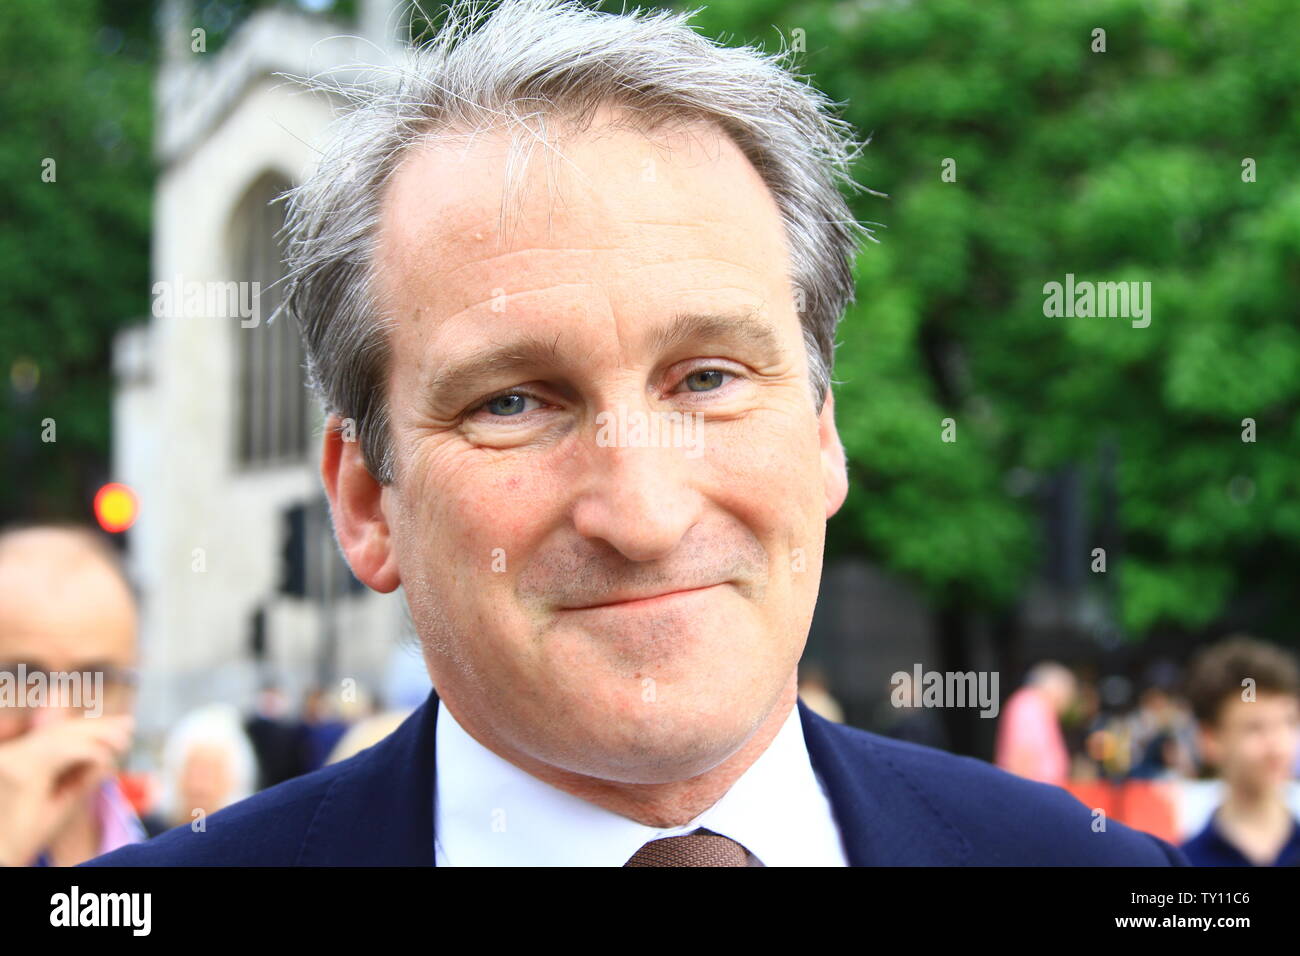 DAMIAN HINDS MP IN PARLIAMENT SQUARE ON 24TH JUNE 2019. CONSERVATIVE PARTY MPS. BRITISH POLITICIANS. UK POLITICS. SECRETARY OF STATE FOR EDUCATION. EDUCATION. CABINET MINISTERS. TORY MPS. TORIES. Stock Photo